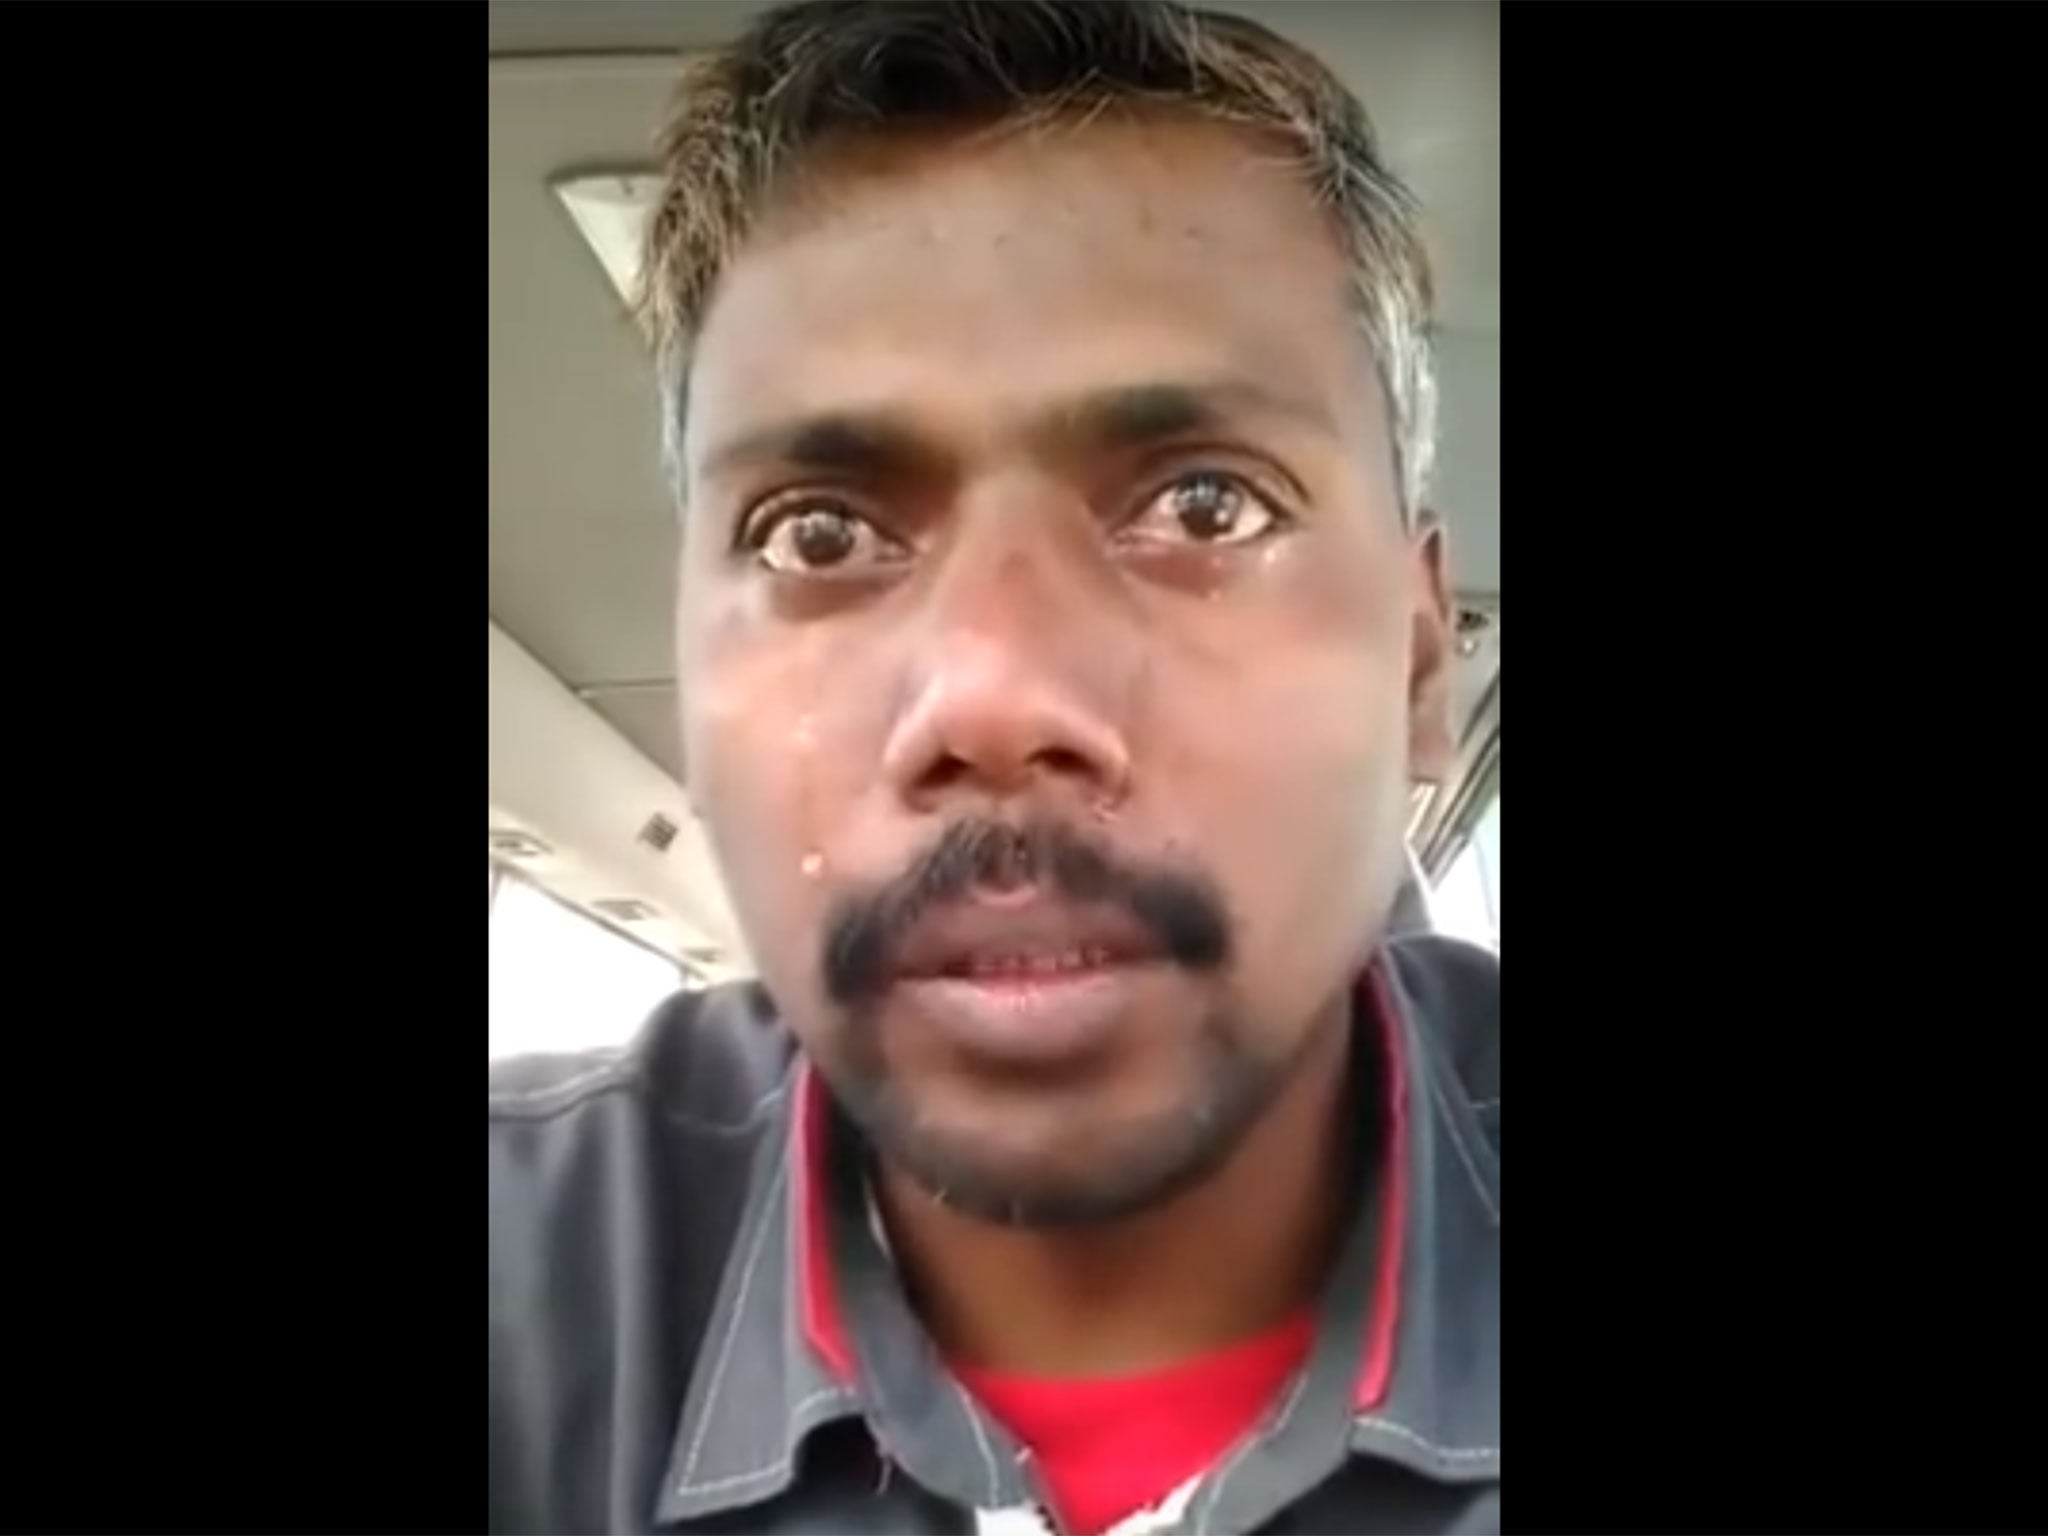 Mr Makandar has been jailed after this video went viral